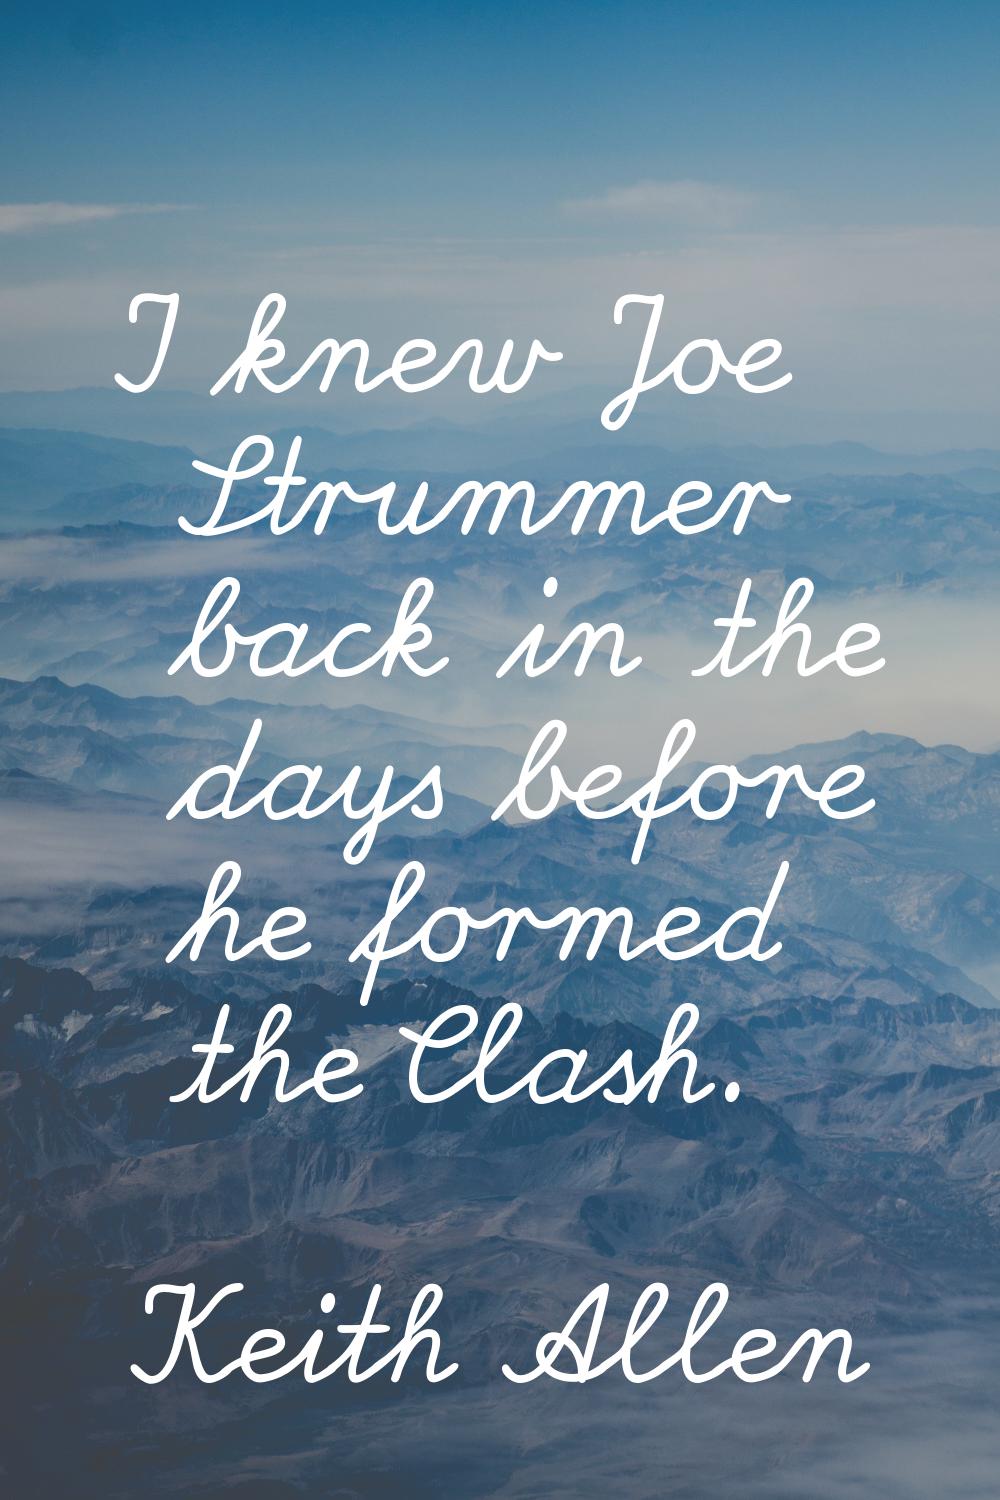 I knew Joe Strummer back in the days before he formed the Clash.